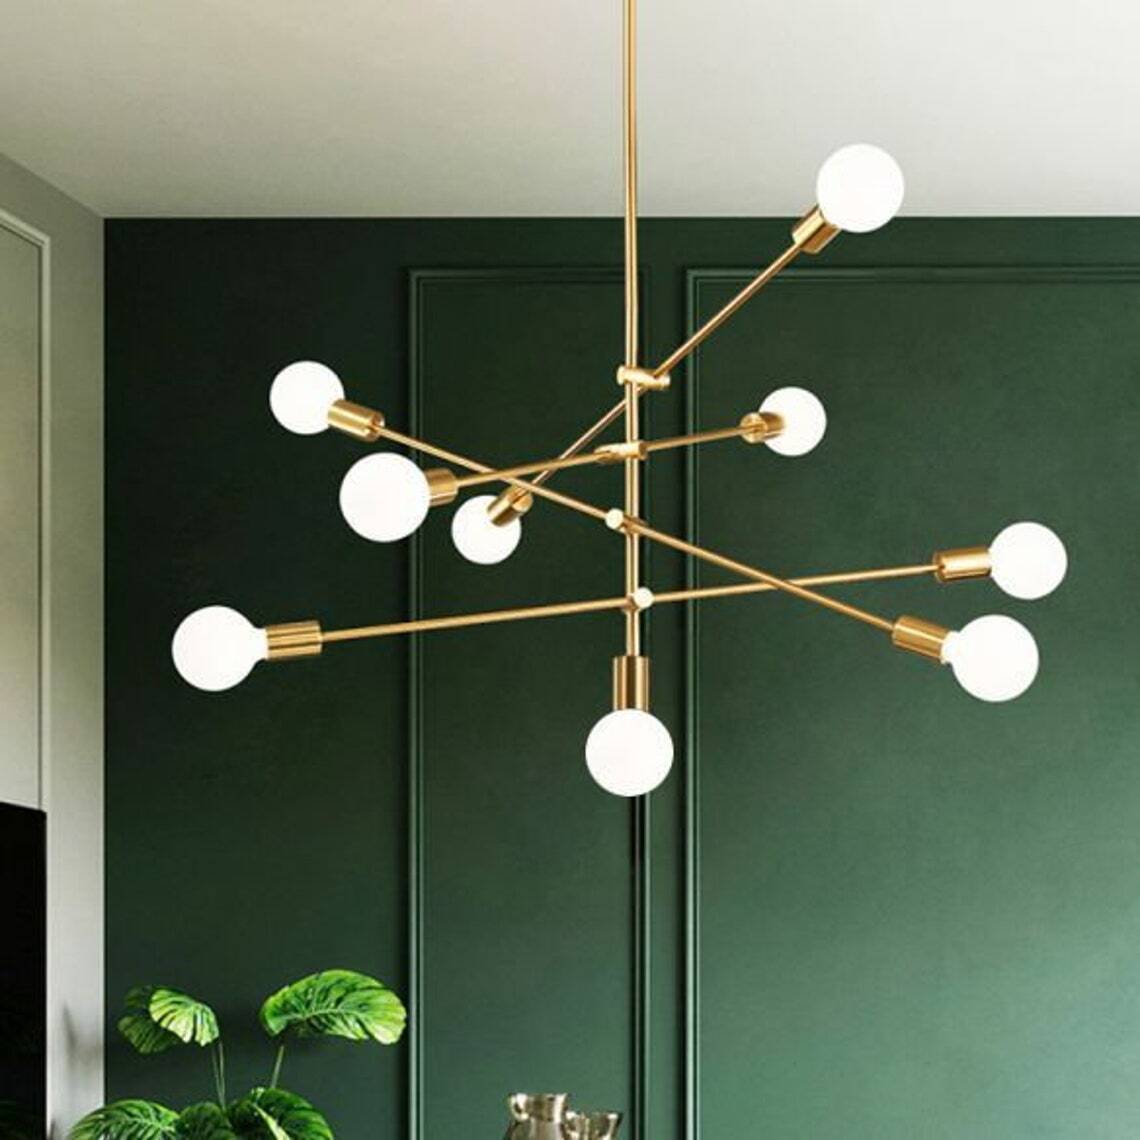 Mid Century Chandelier 8+1 Lights Ceiling Lamp in Polished Brass Modern Fixture